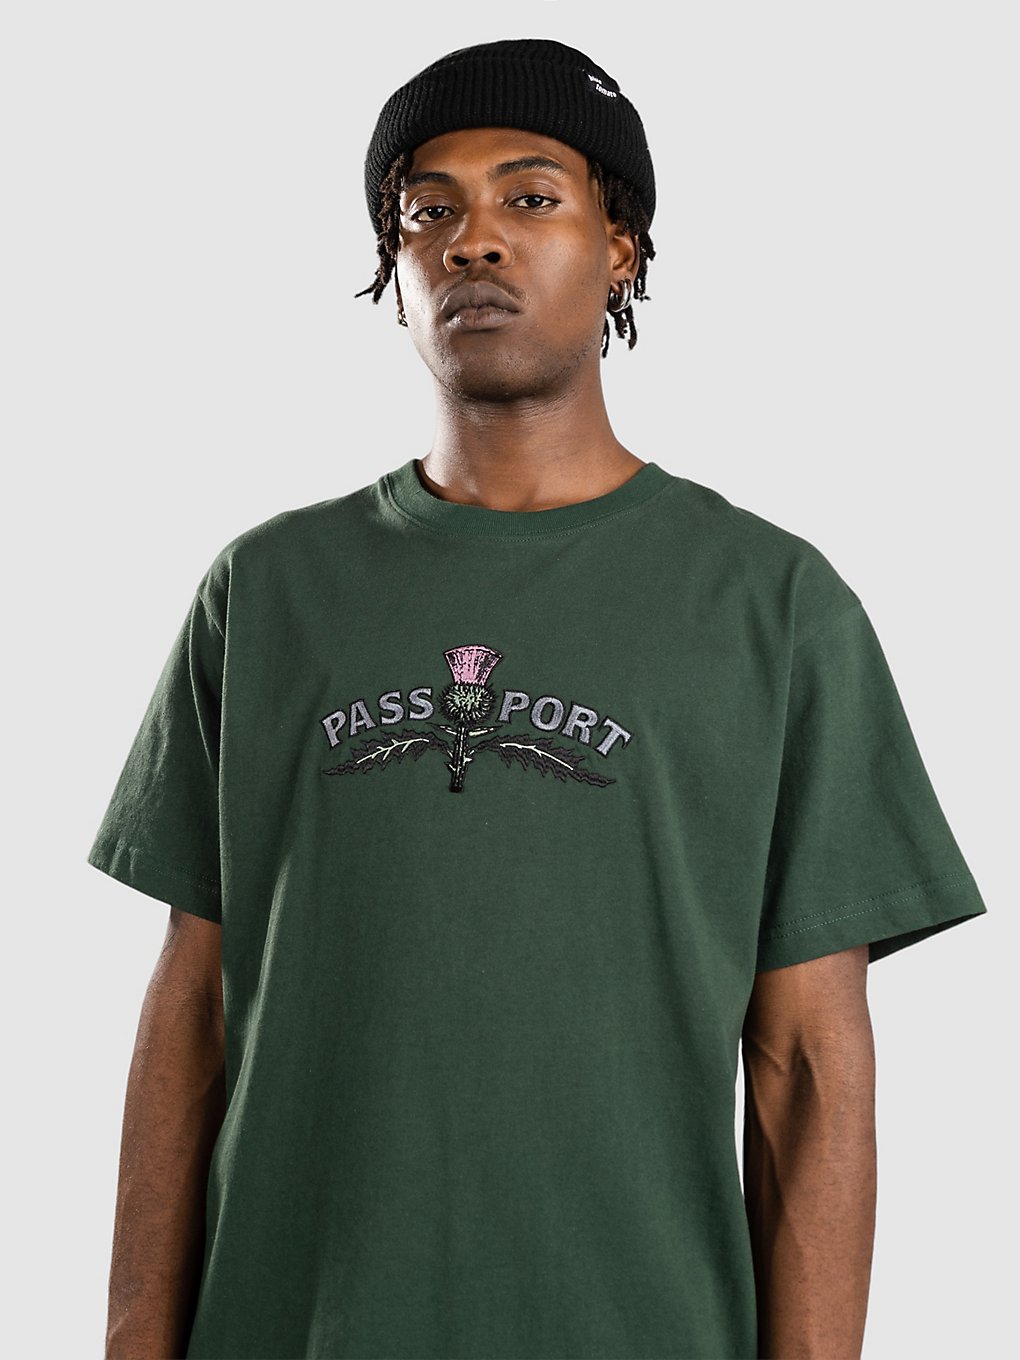 Pass Port Thistle Embroidery T-Shirt forest green kaufen